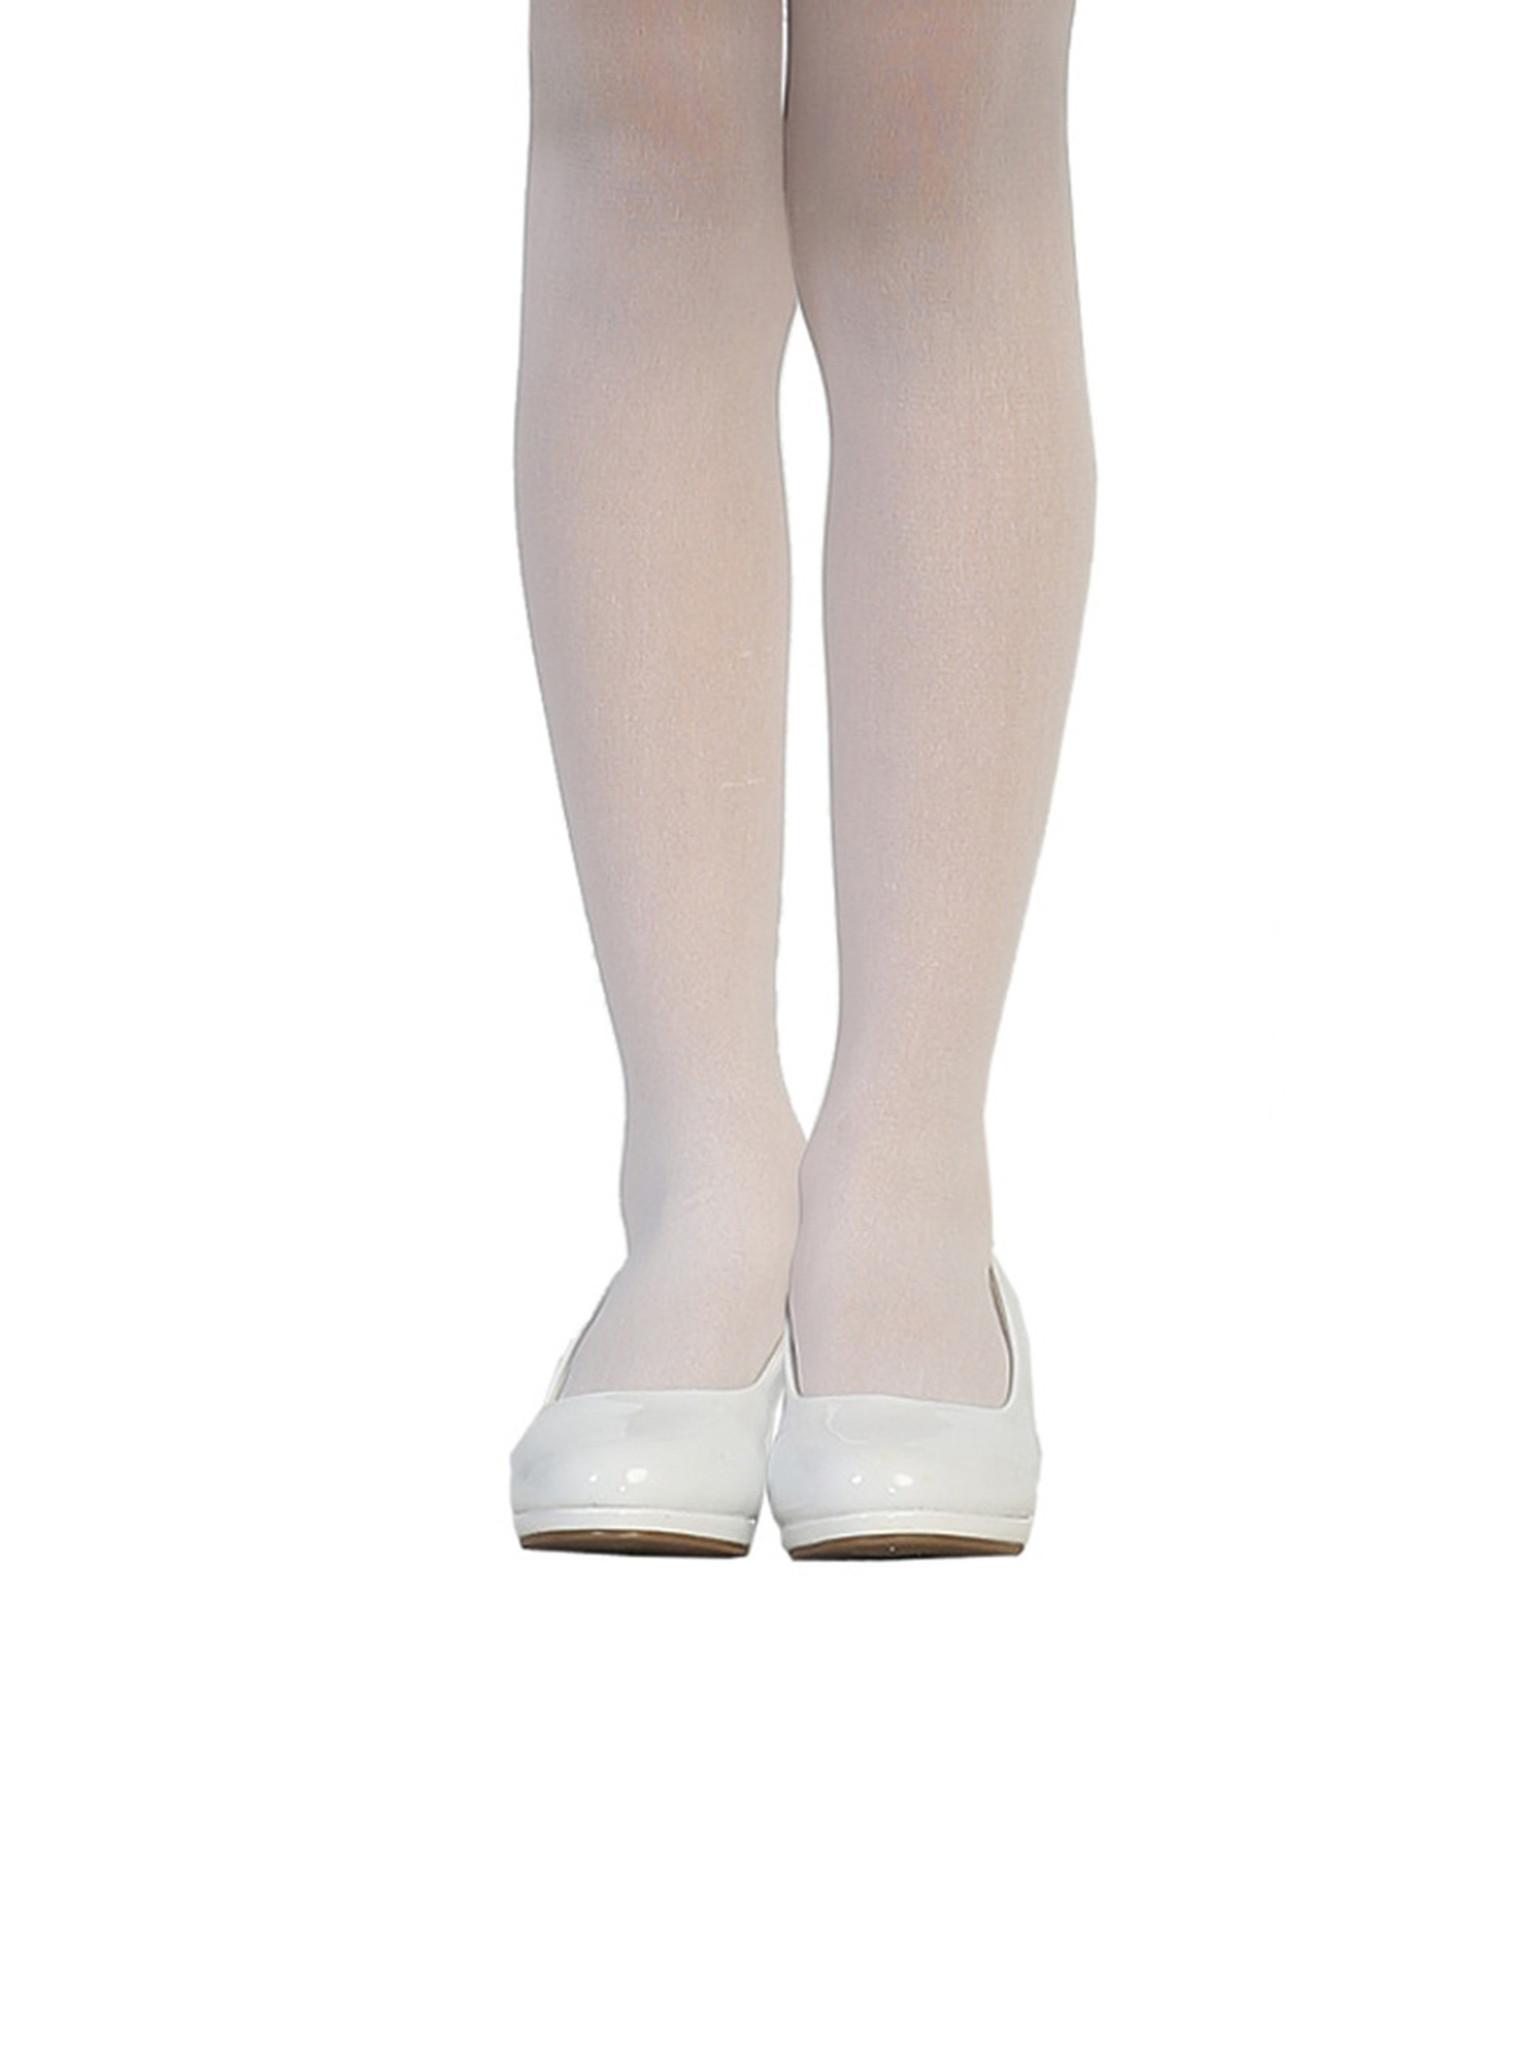 White Tights for Communion - Giftswithlove,Inc.